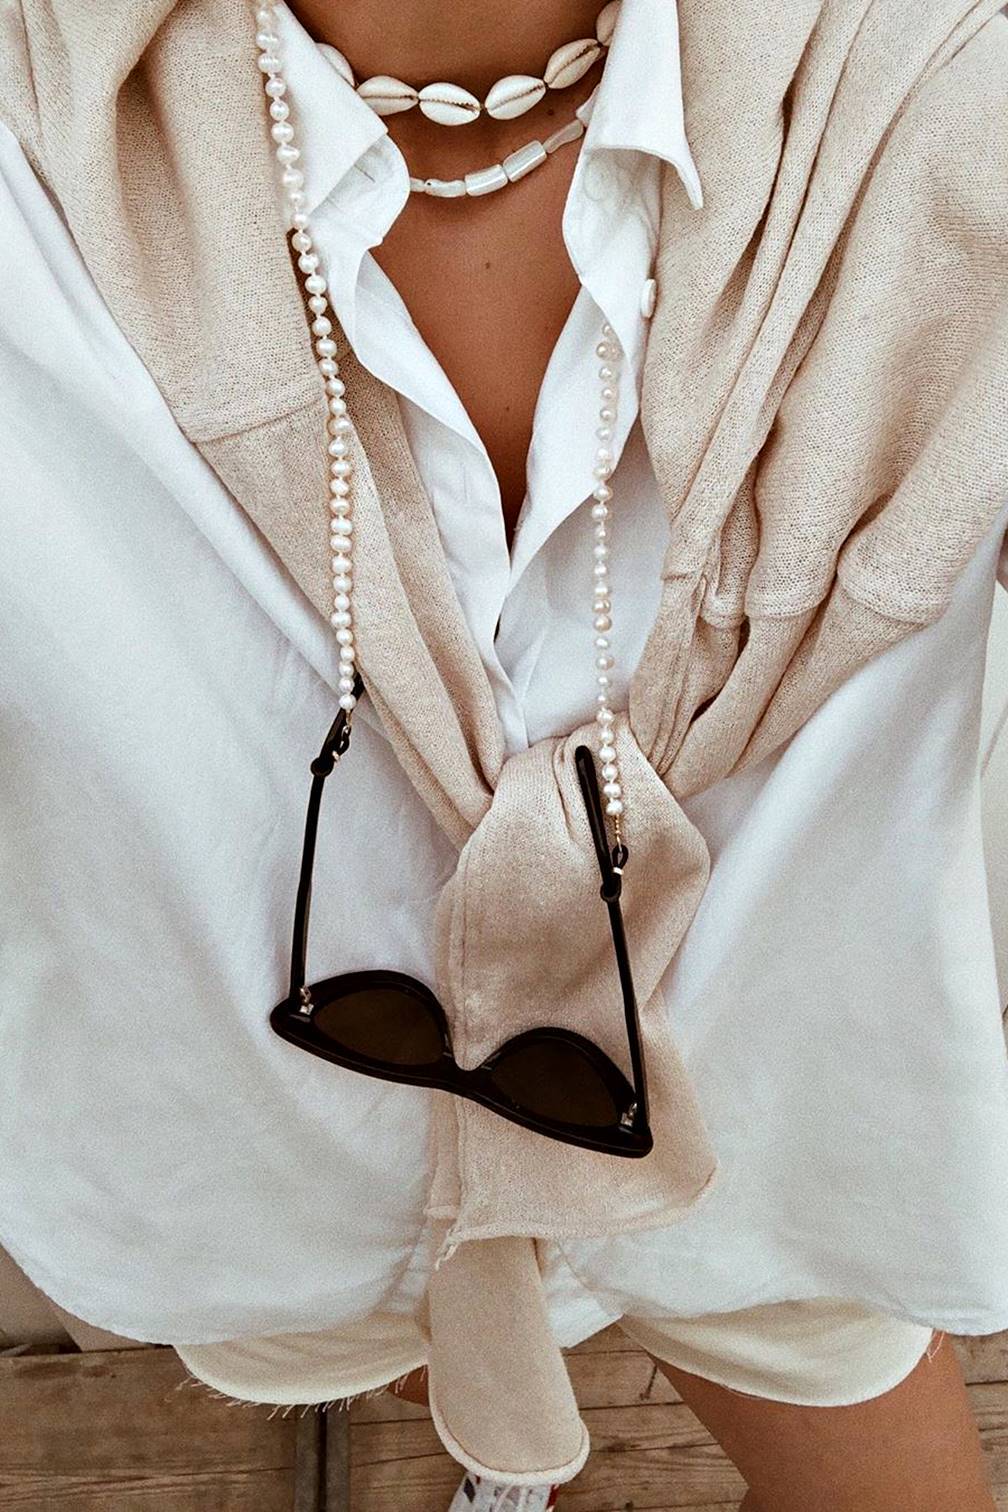 Pearls - Sunglasses Chain - Boutique Minimaliste has waterproof, durable, elegant and vintage inspired jewelry